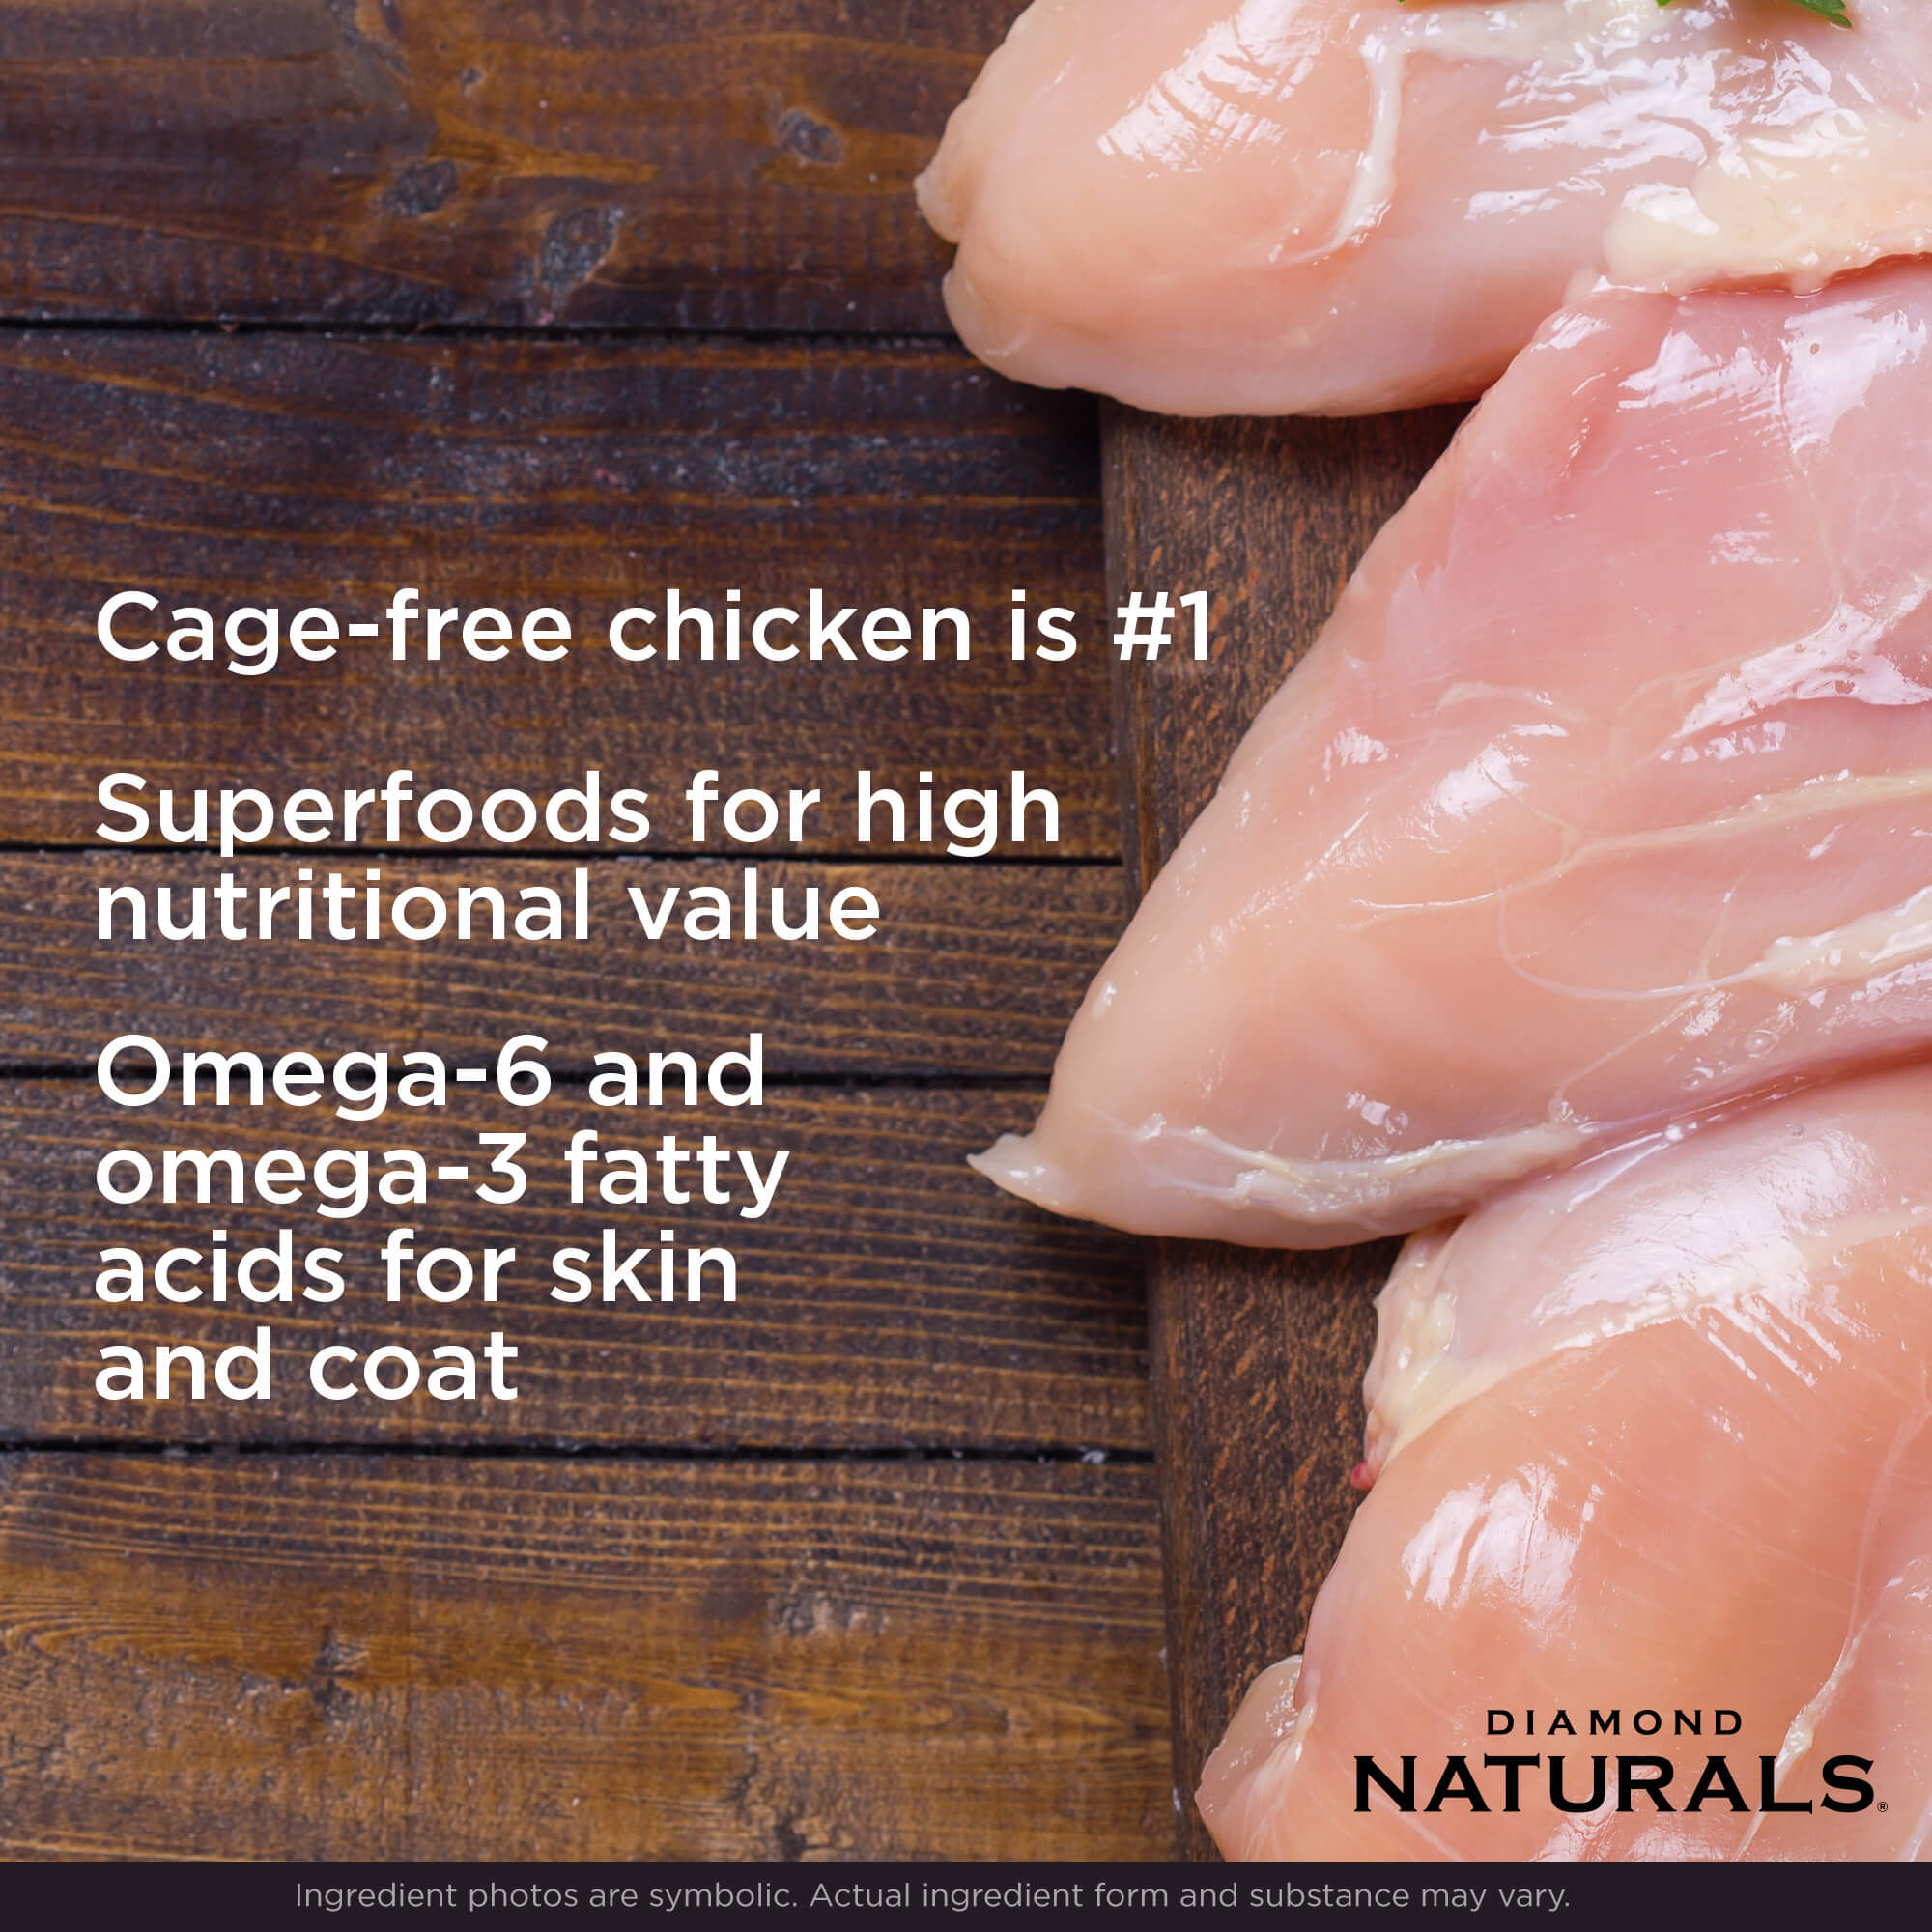 Diamond Naturals Small Breed Cage-free chicken is #1